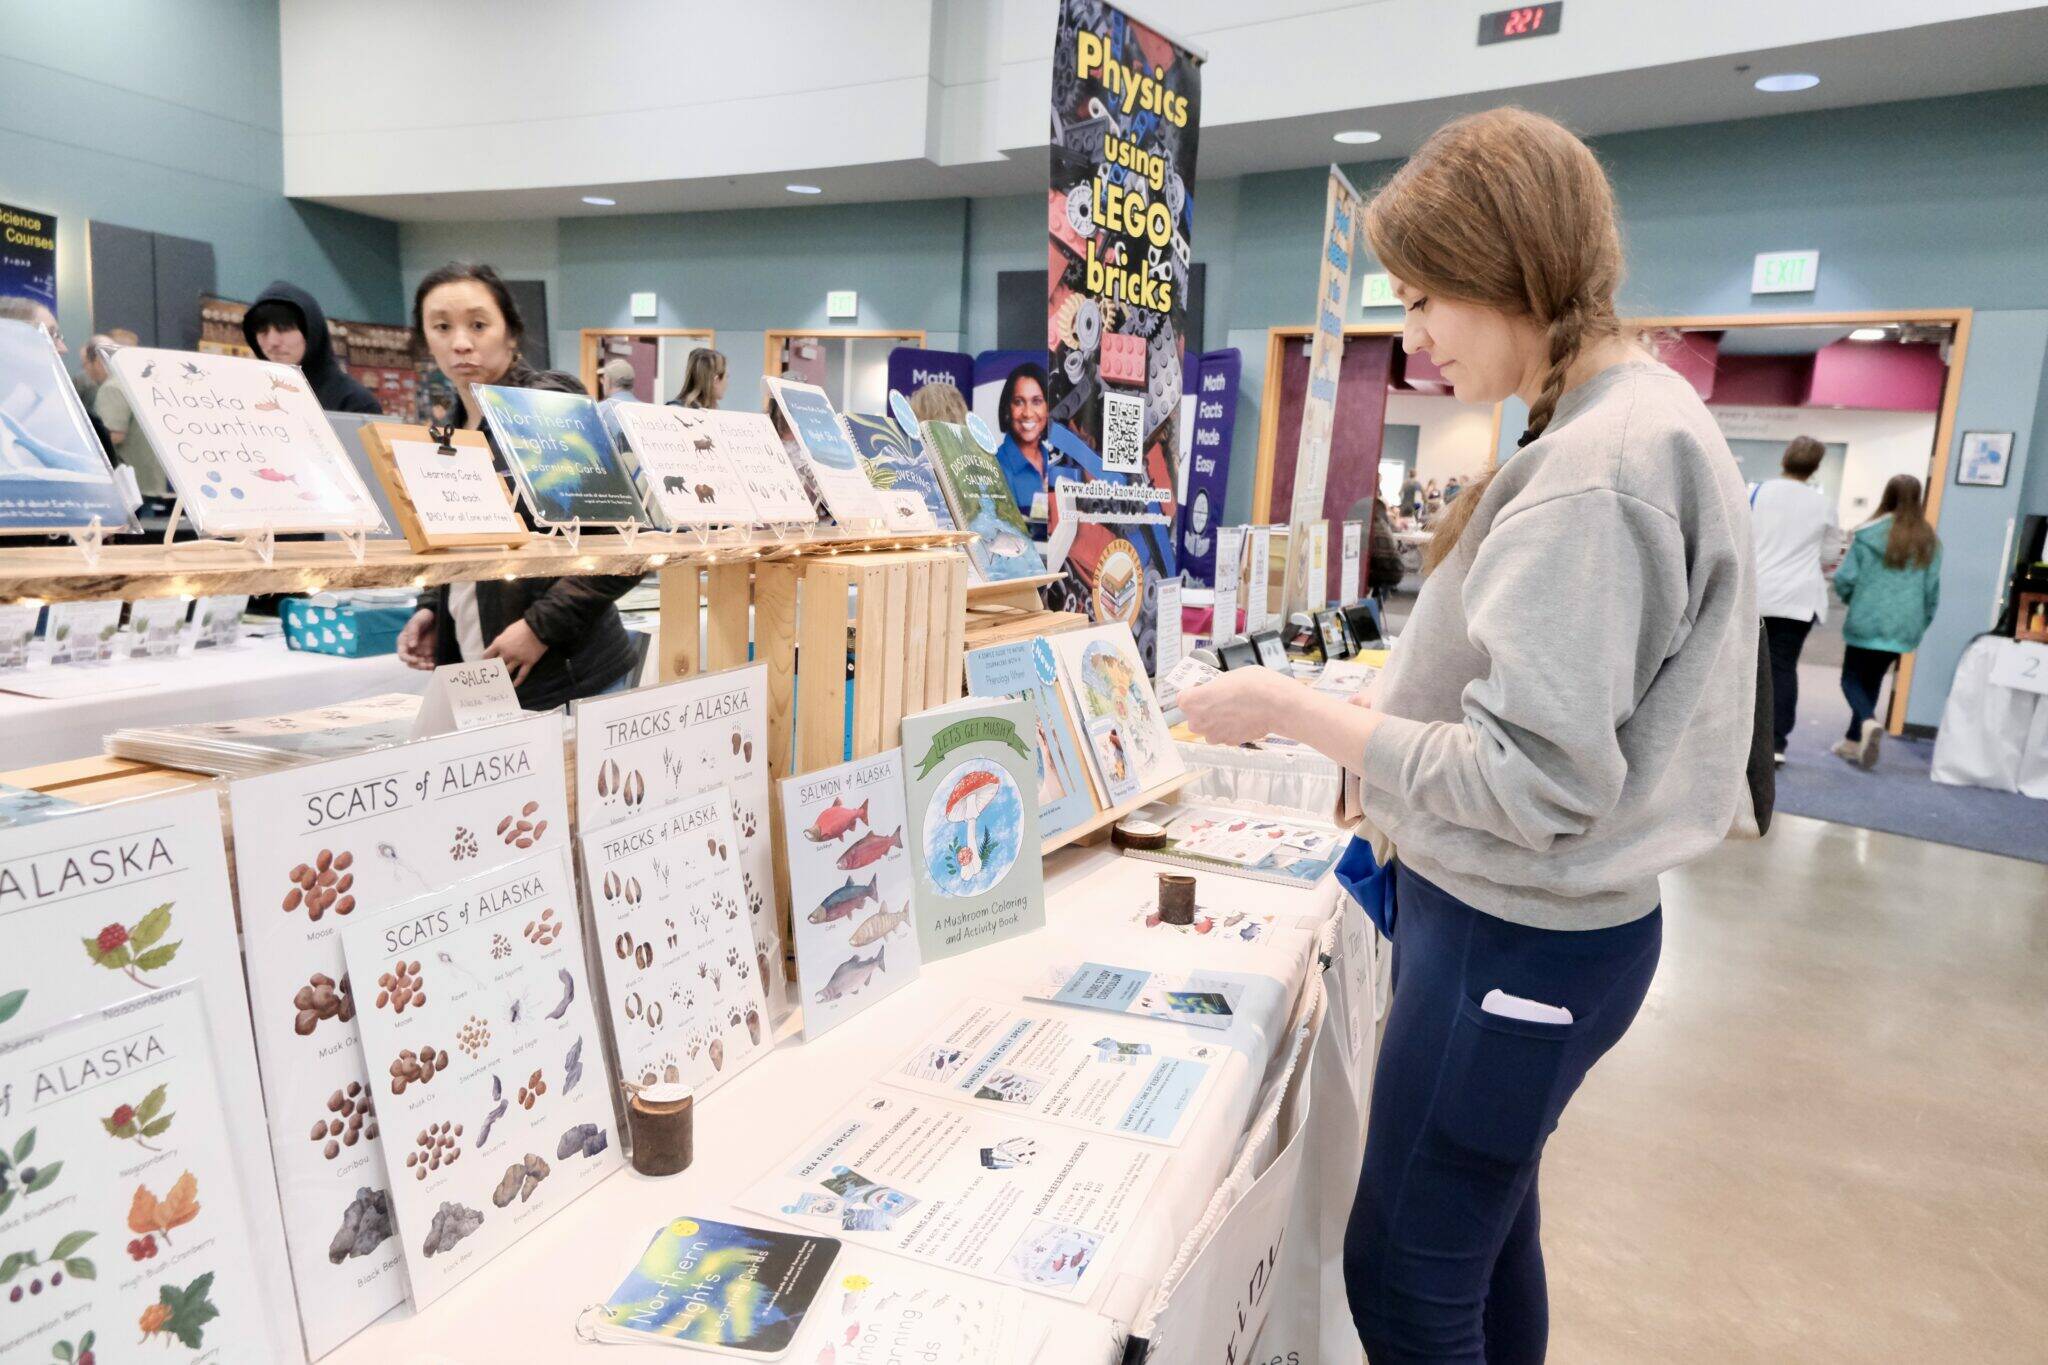 Danielle Brubaker shops for homeschool materials at the IDEA Homeschool Curriculum Fair in Anchorage on Thursday. A court ruling struck down the part of Alaska law that allows correspondence school families to receive money for such purchases. (Claire Stremple/Alaska Beacon)